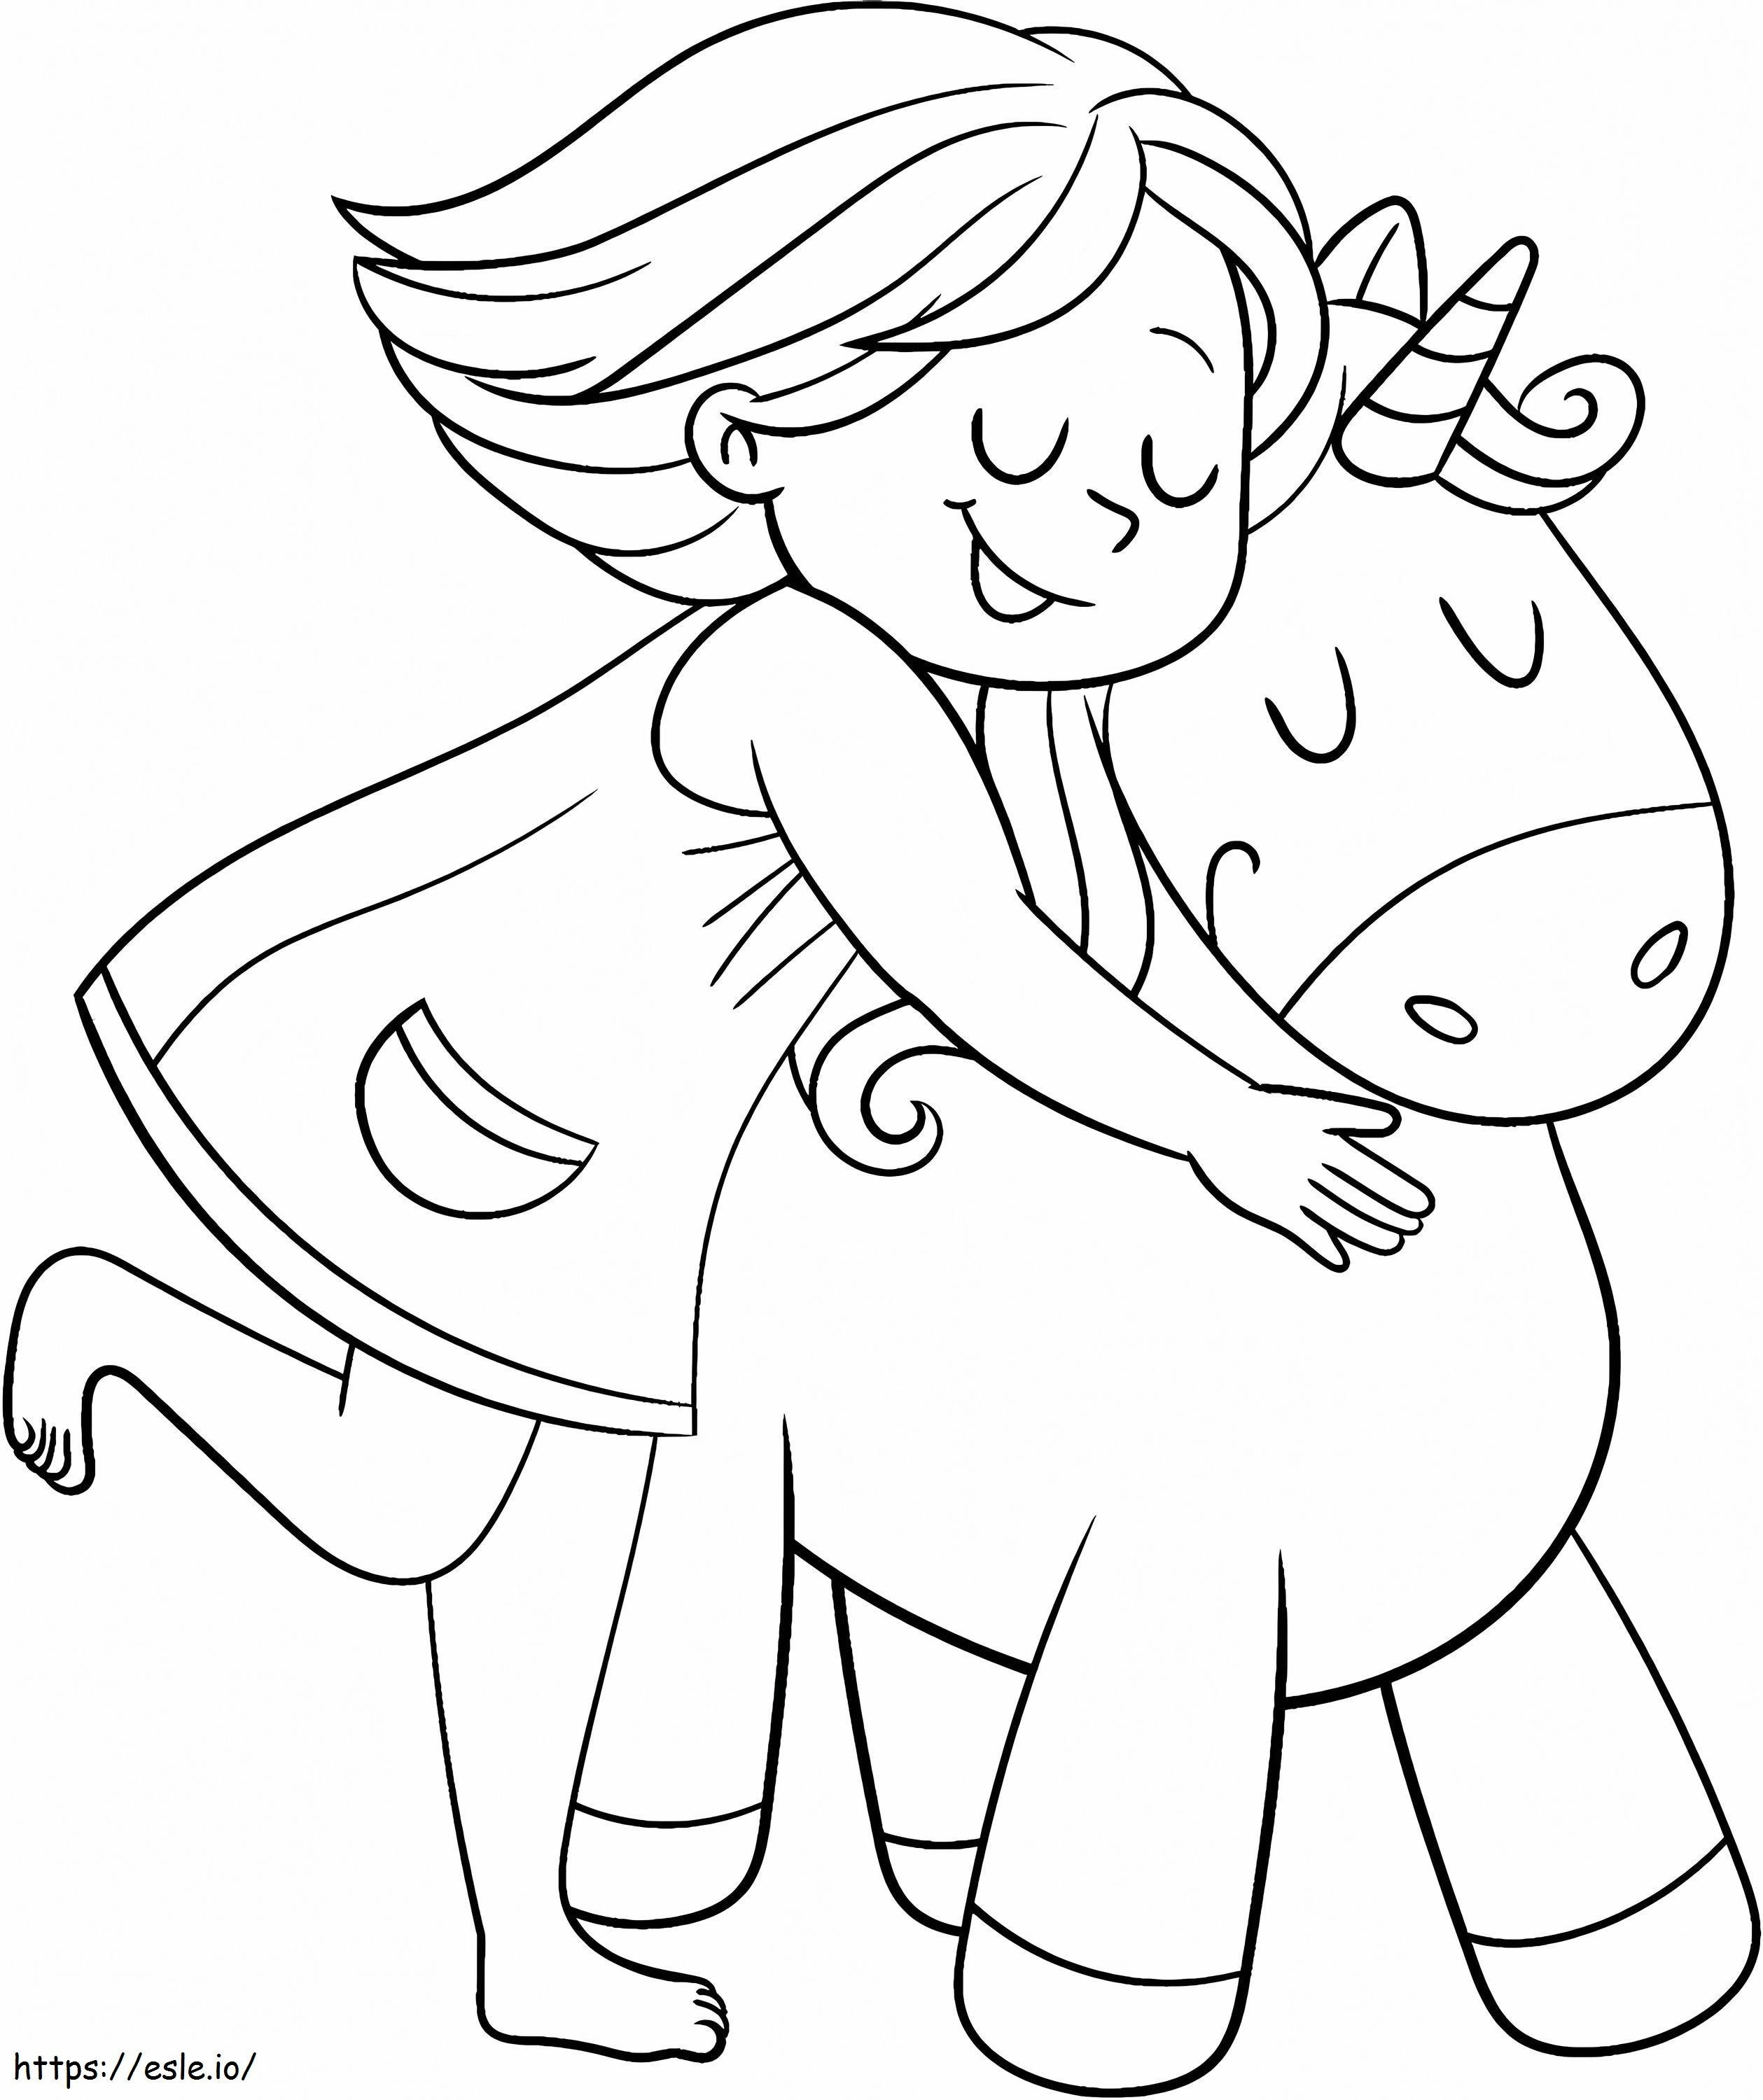 1563239724 Girl With Unicorn A4 coloring page